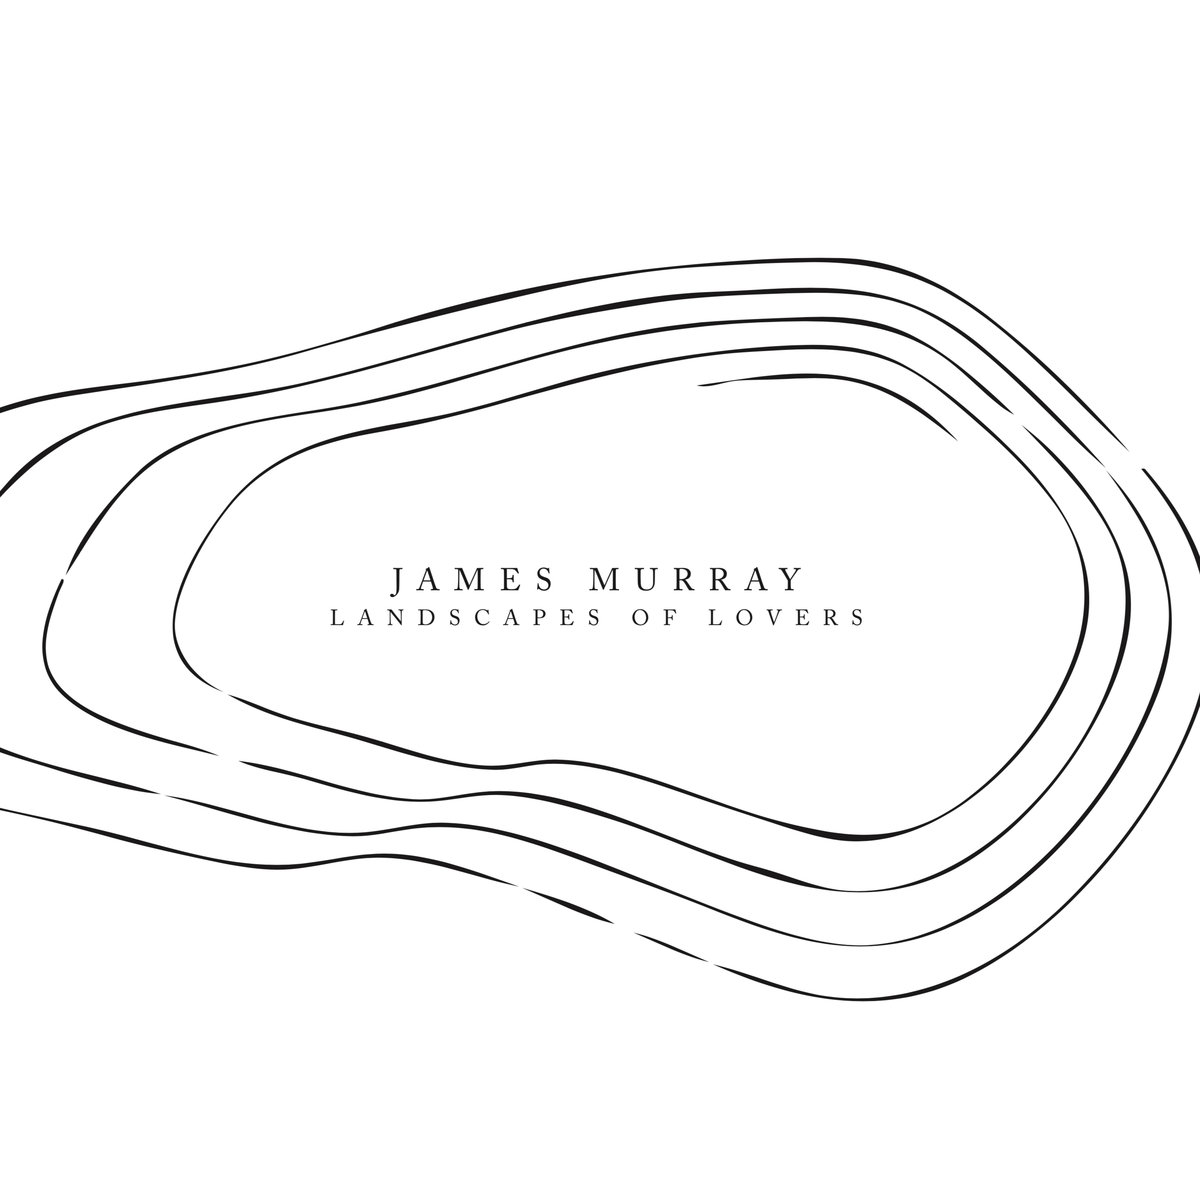 James Murray – Landscapes of Lovers